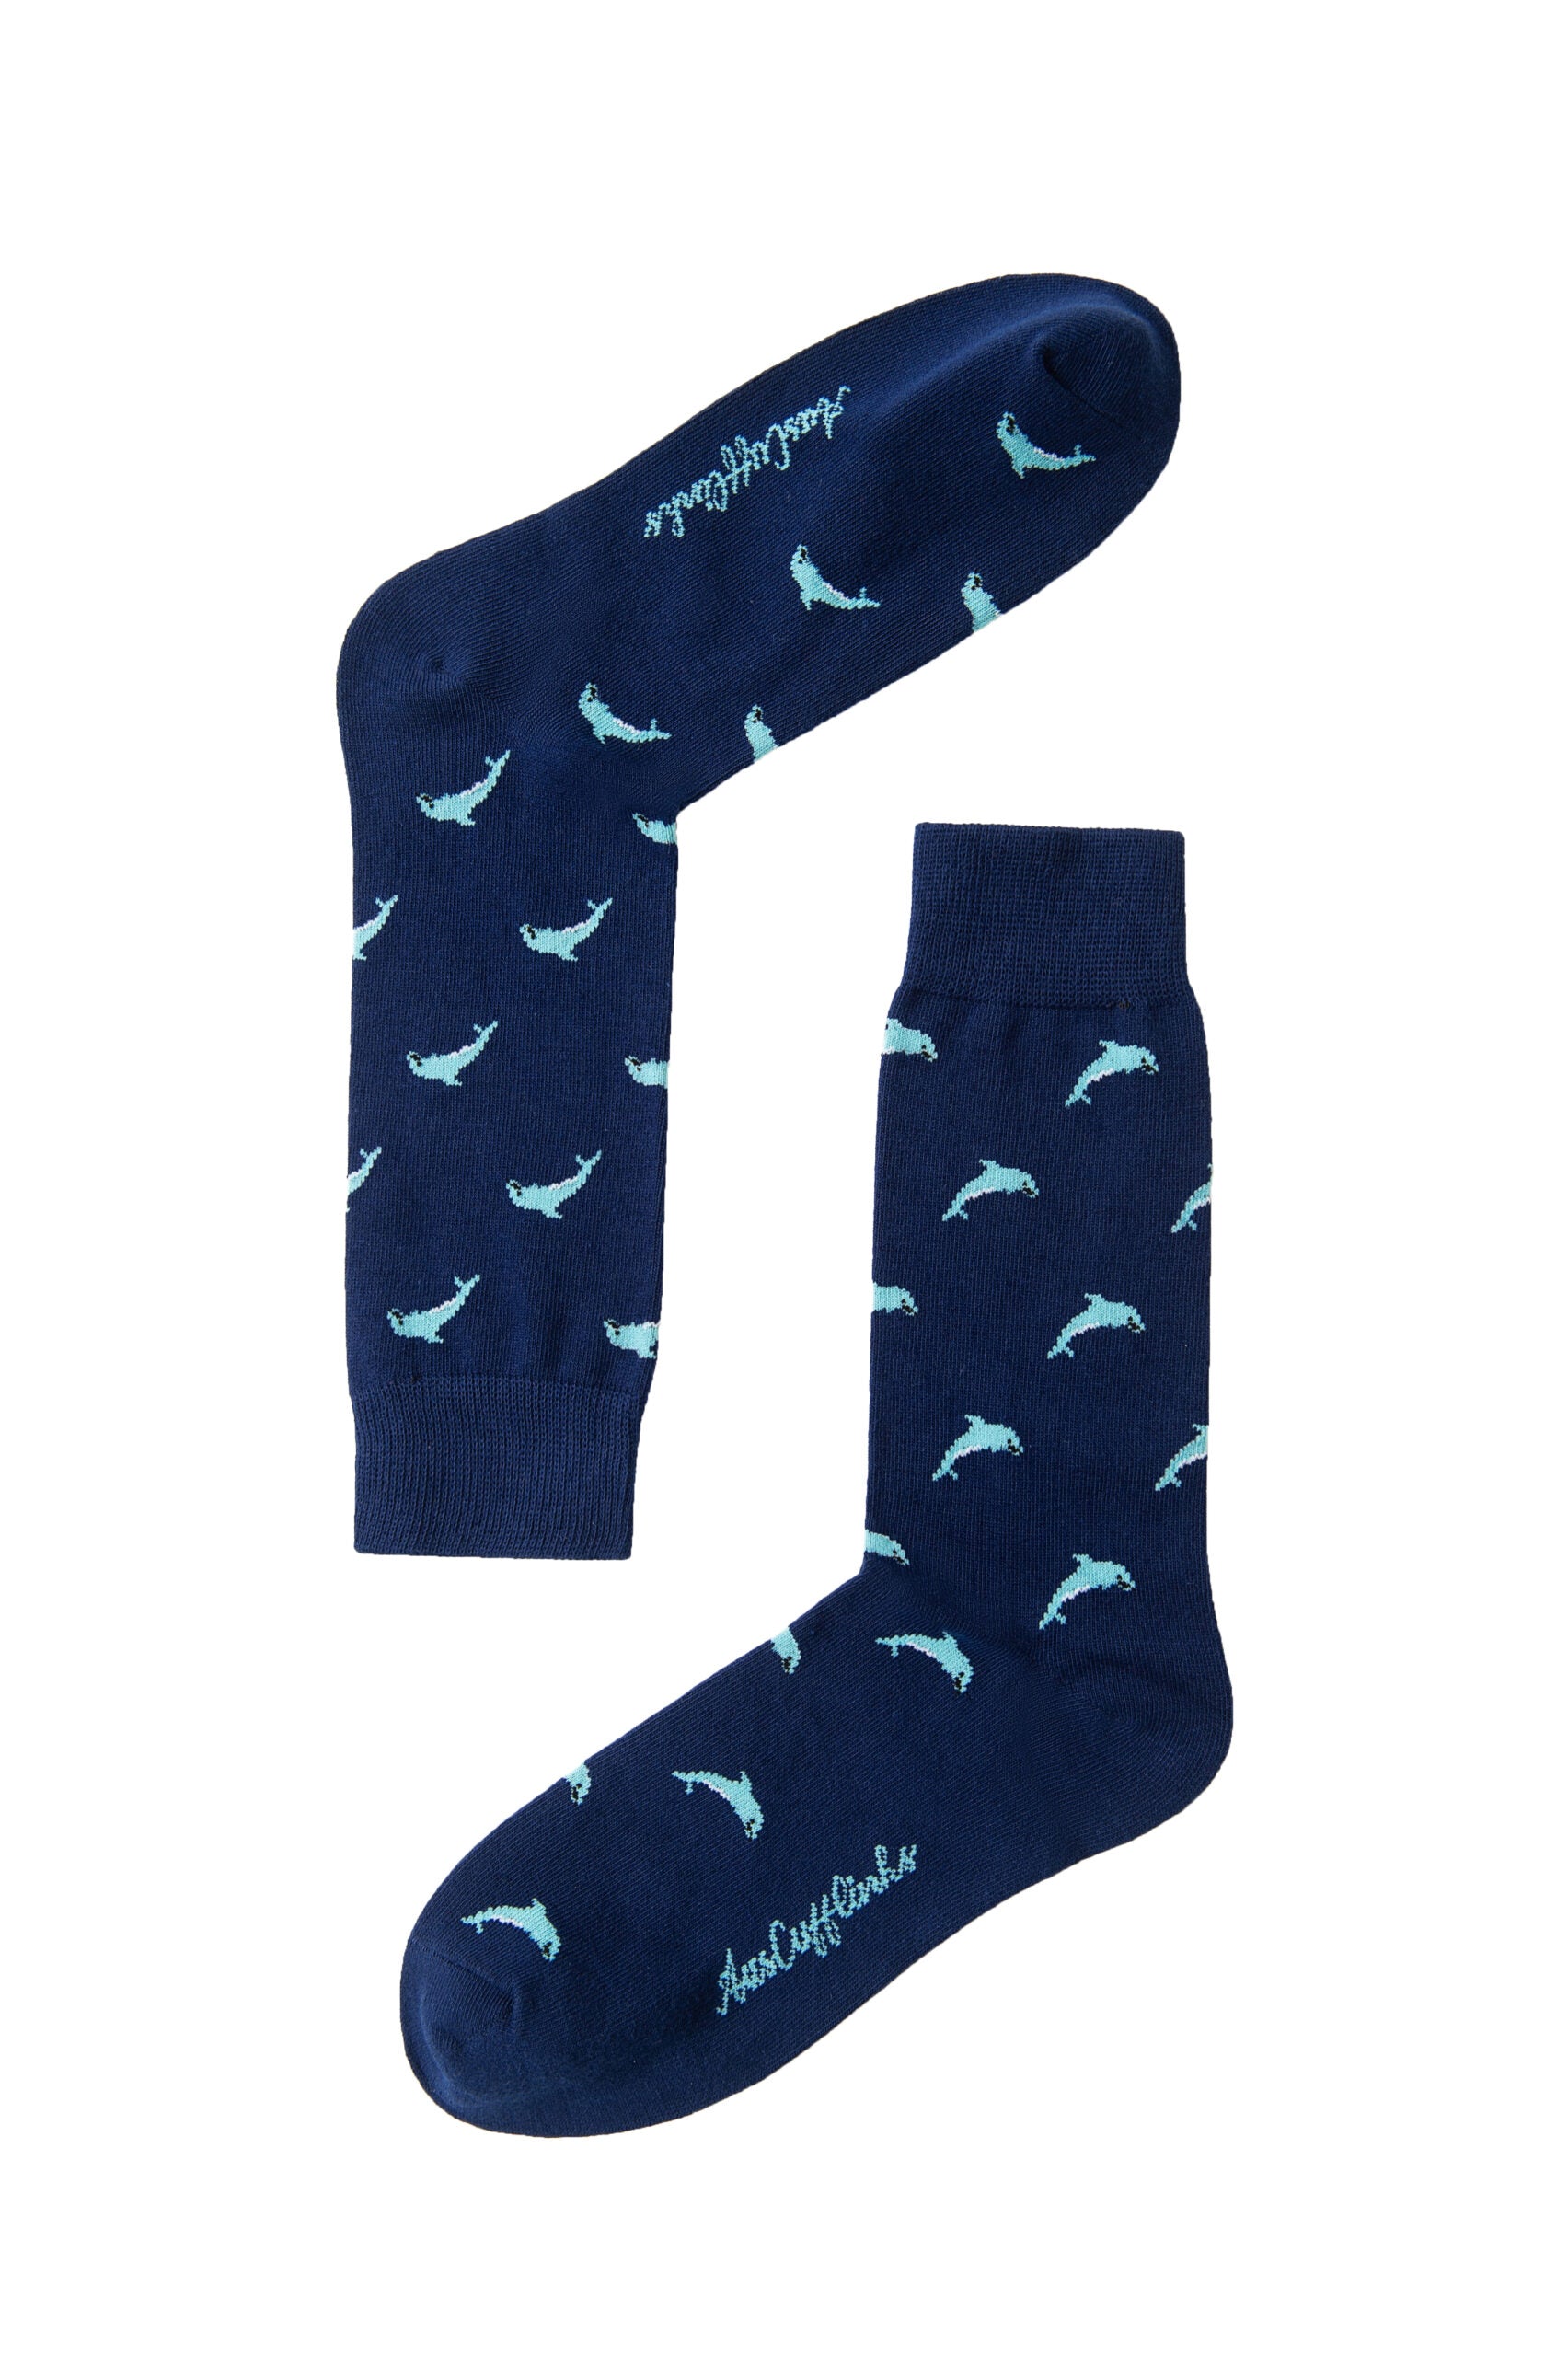 A pair of navy Dolphin Socks with sharks on them.